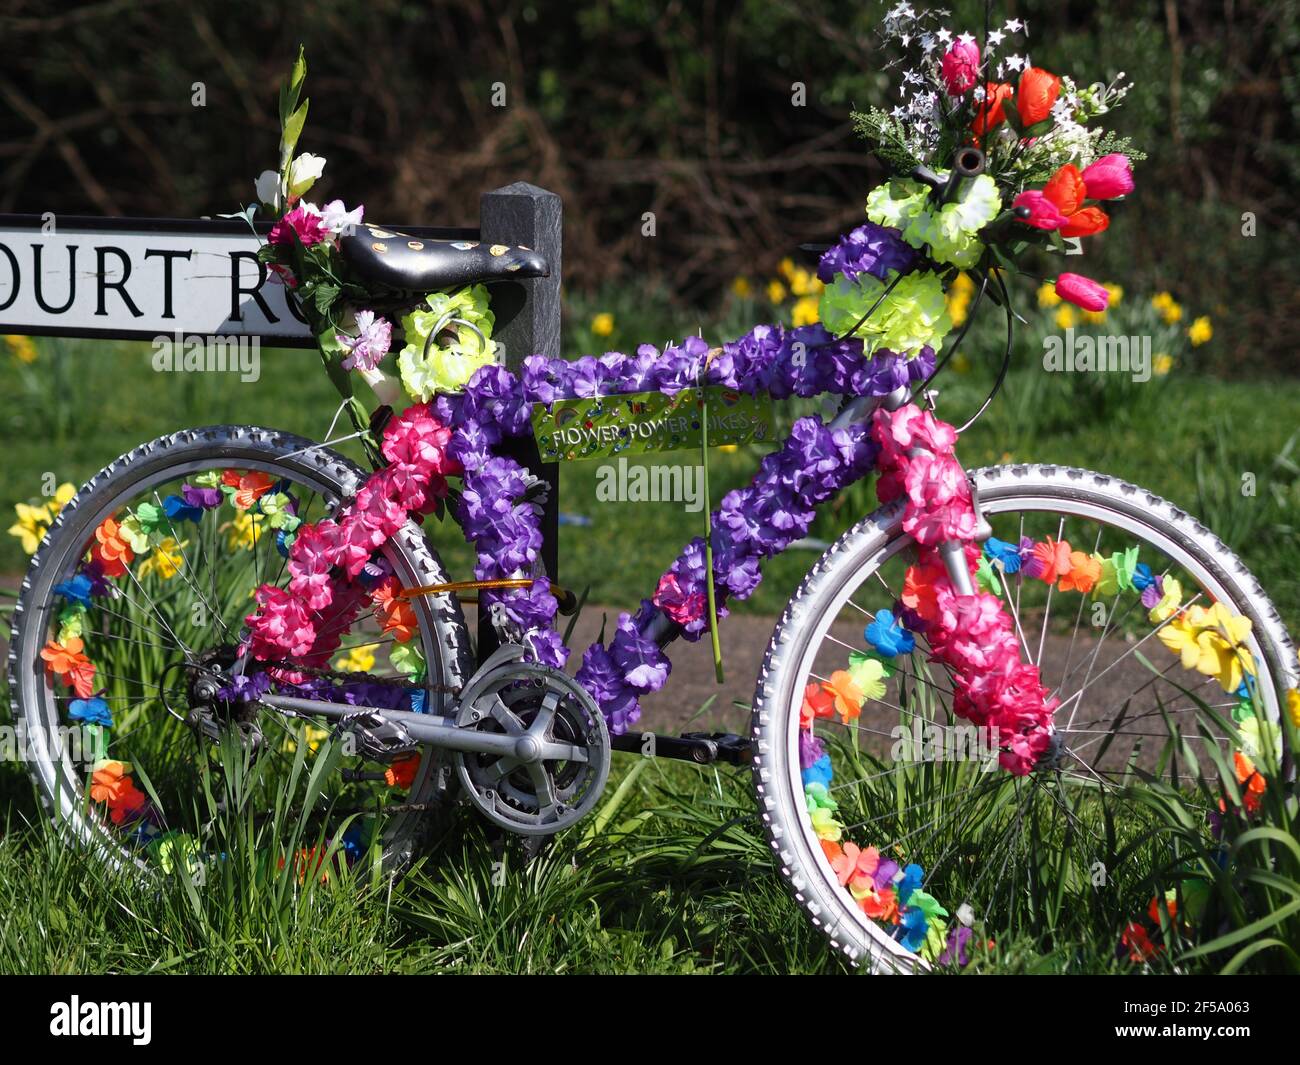 Rainham, Kent, UK. 25th Mar, 2021. A mystery artist has created some stunning 'Flower Power Bikes' around Rainham in Kent - which are bikes that have been artistically decorated with flowers to bring joy to people during lockdown. Credit: James Bell/Alamy Live News Stock Photo